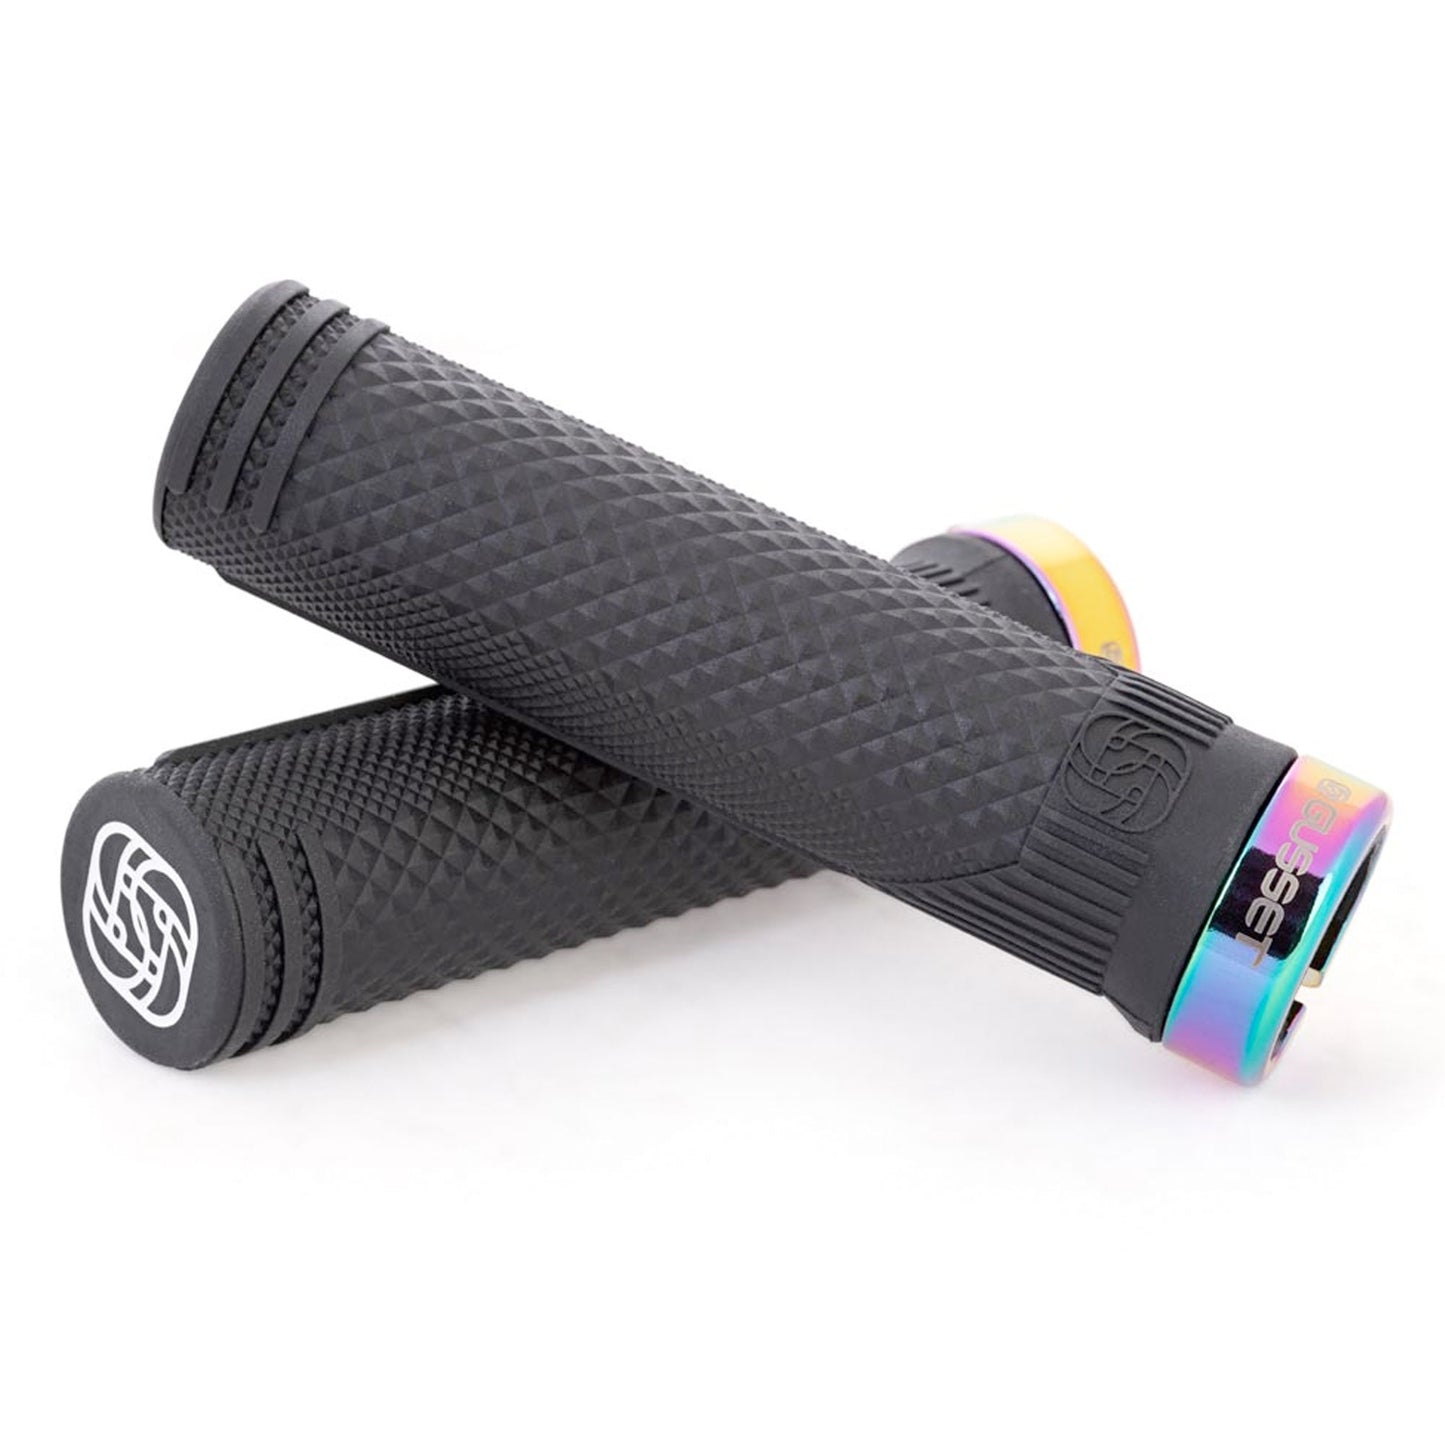 Gusset S2 Lock-On Extra Soft Compound MTB Grips, Oil Black - Woolys Wheels